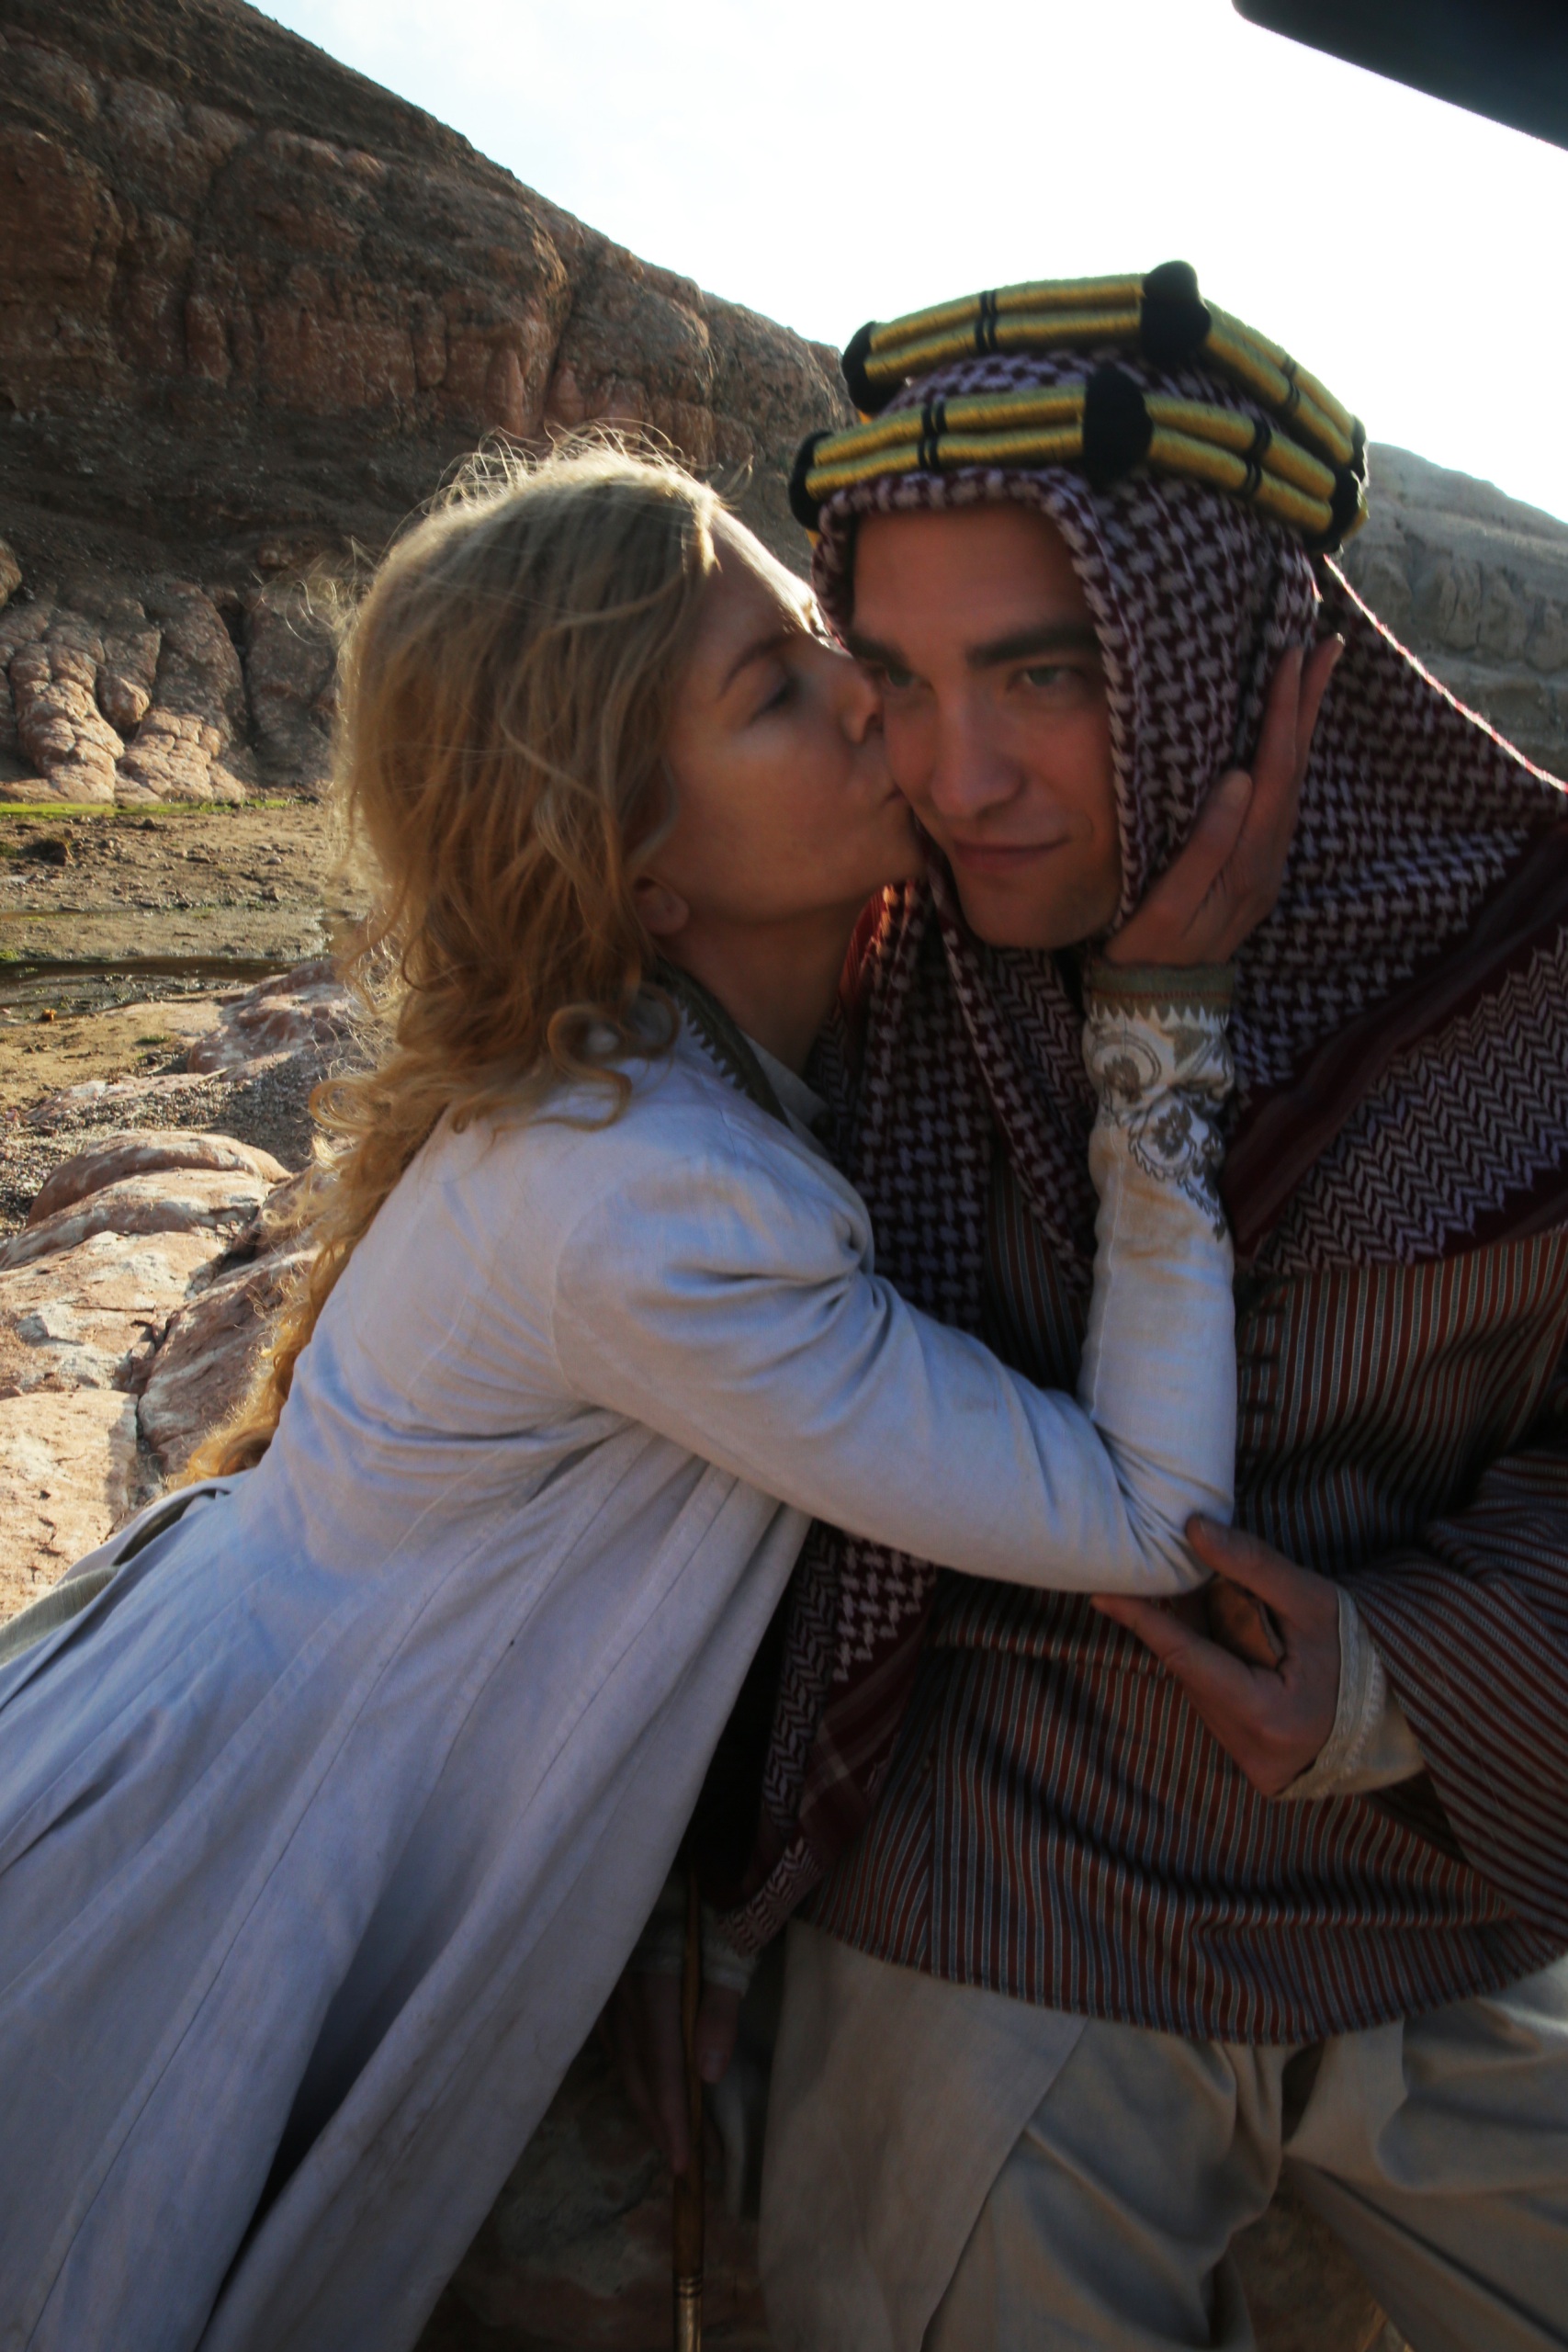 A blonde woman in a white dress kisses a man with a headscarf on the cheek, a rock behind them. 